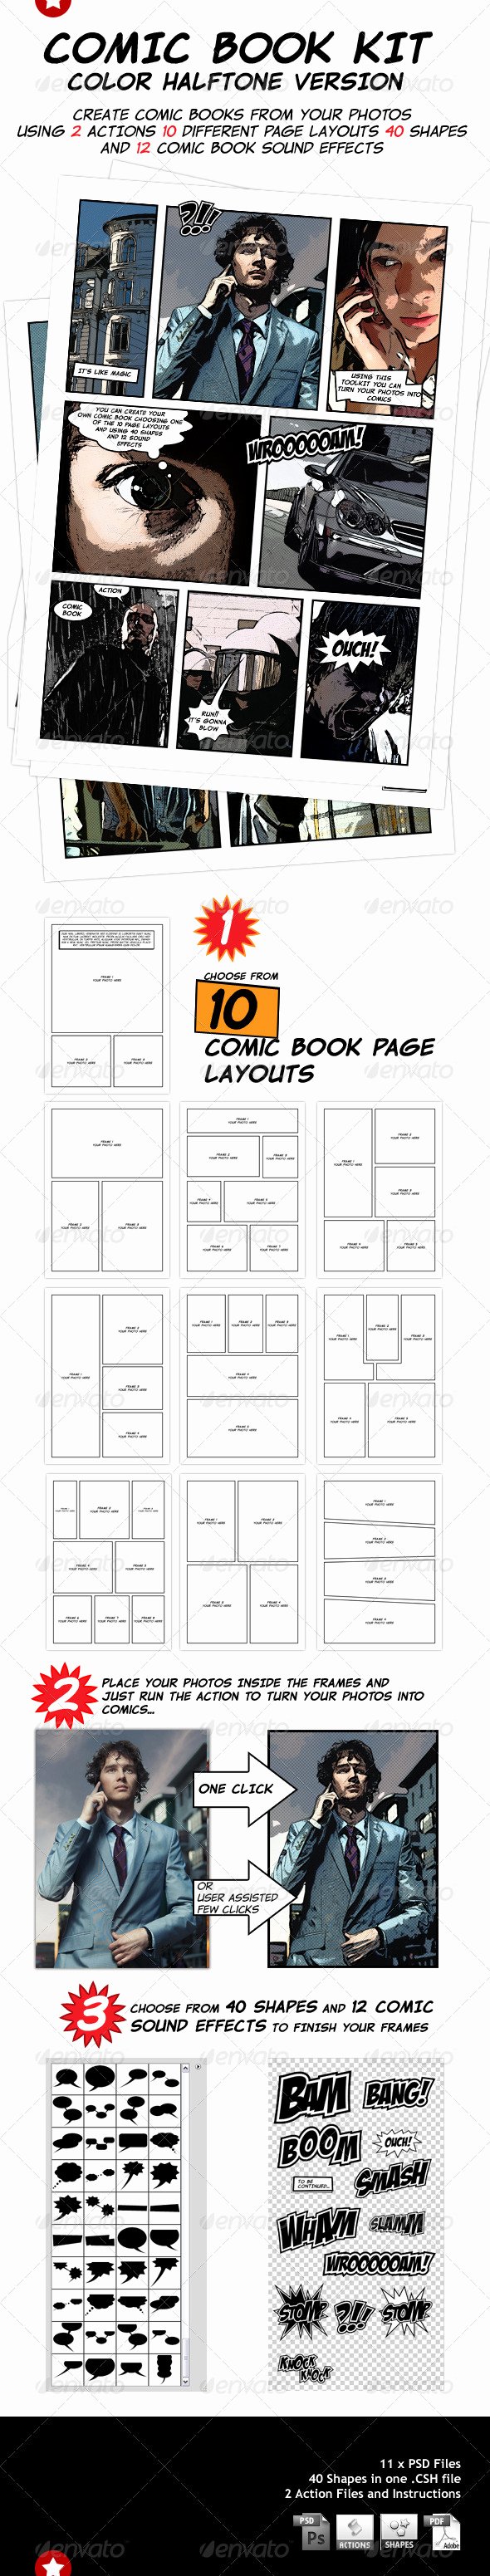 Comic Book Template Photoshop Beautiful You Can Choose From 10 Ic Book Page Layout Templates